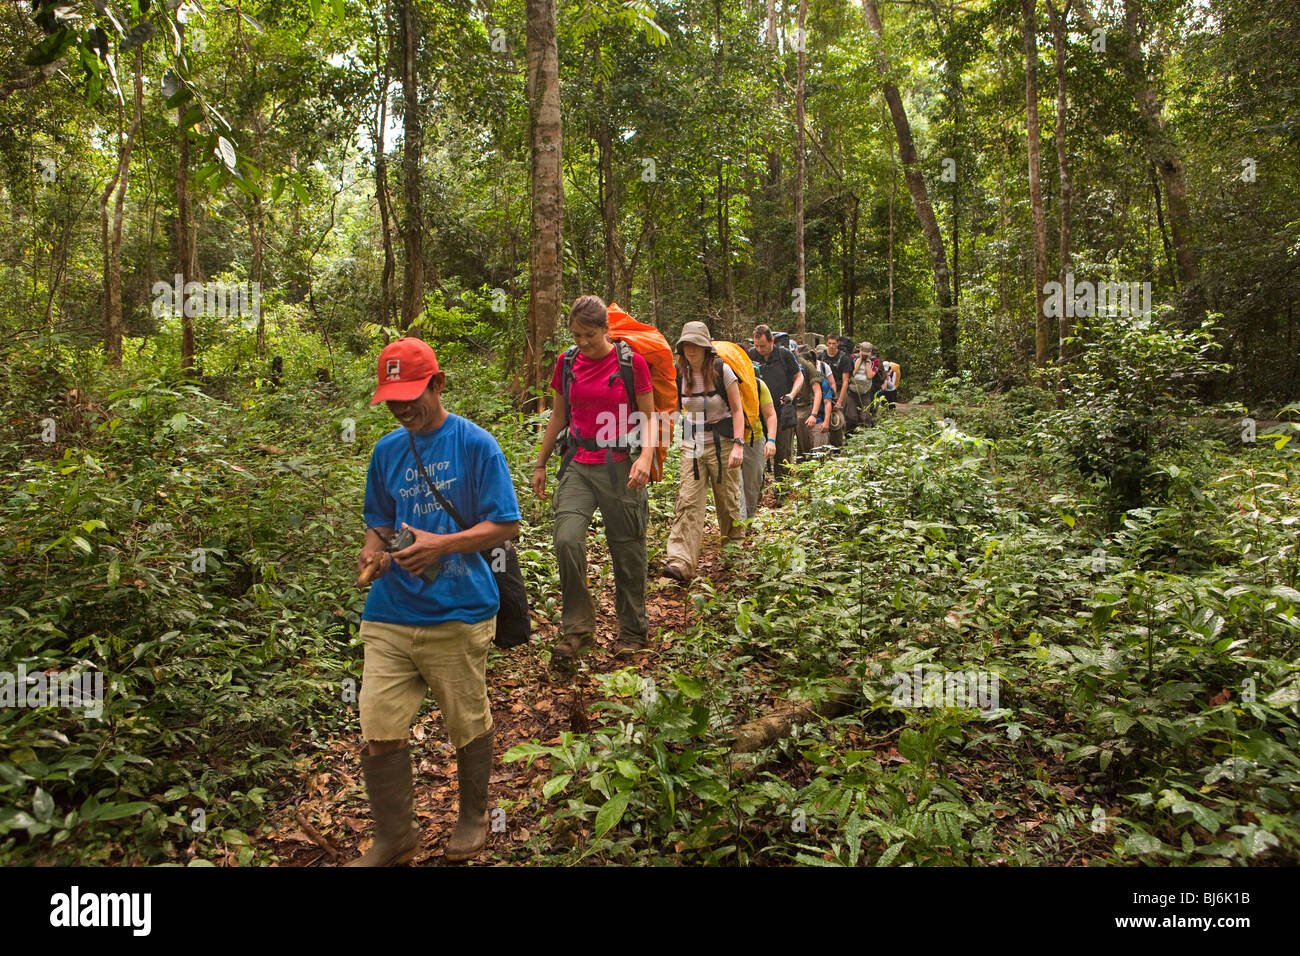 Indonesia, Sulawesi, Operation Wallacea, sixth form students starting rainforest walk at forest fringe Stock Photo